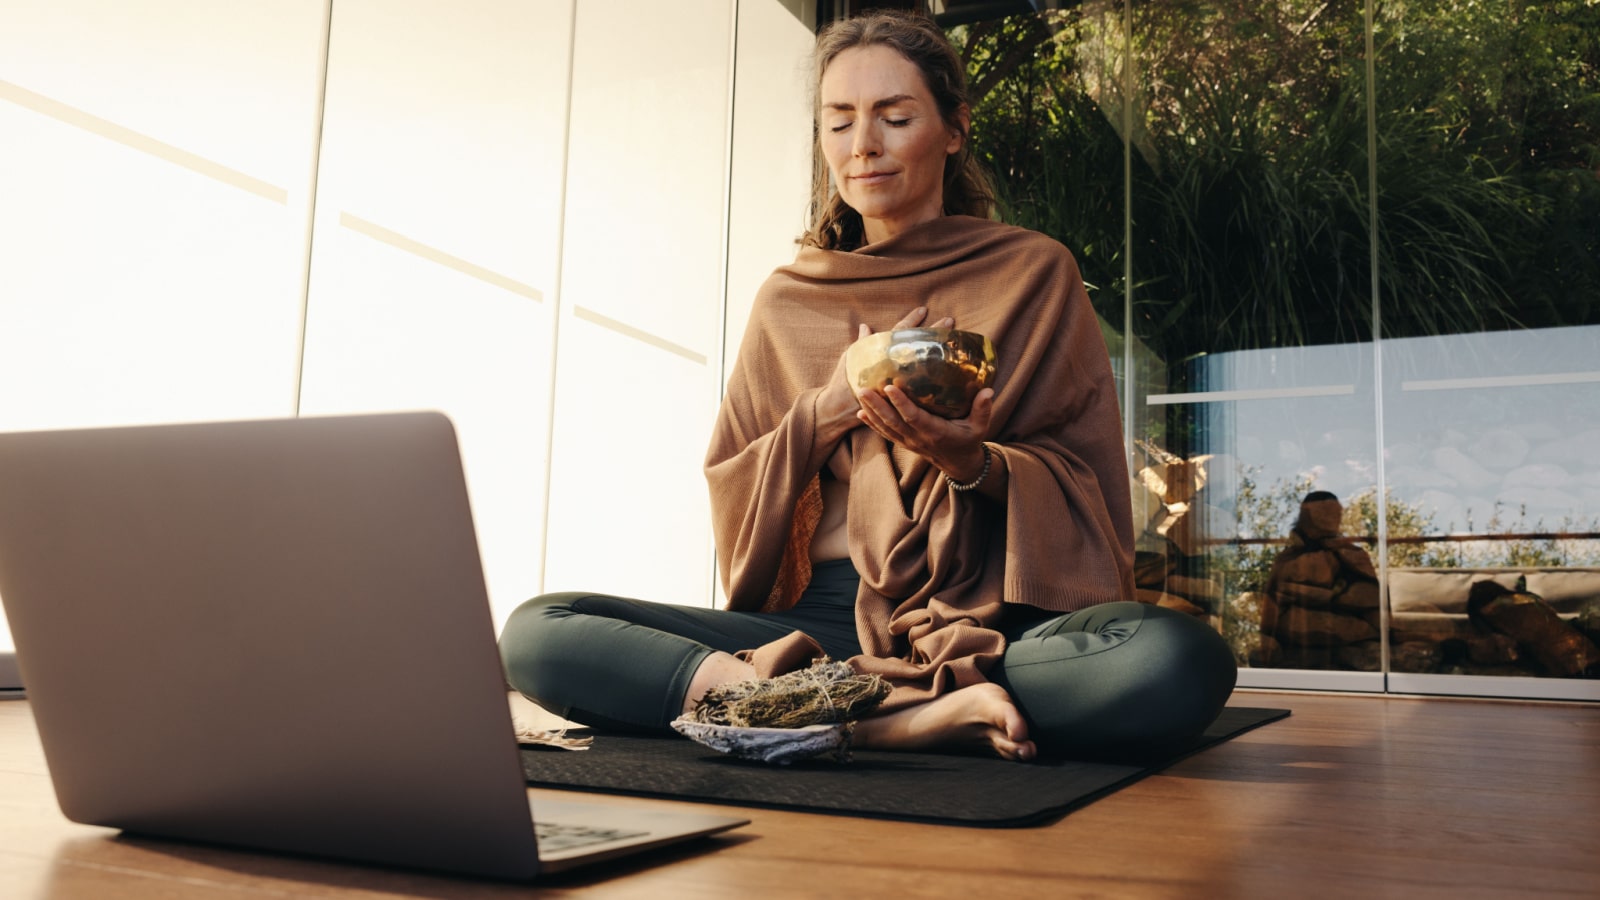 Ayurvedic healer meditating with a singing bowl and sage during an online holistic class. Woman performing a self-healing and purifying ceremony at home. Senior woman taking care of her ageing body.